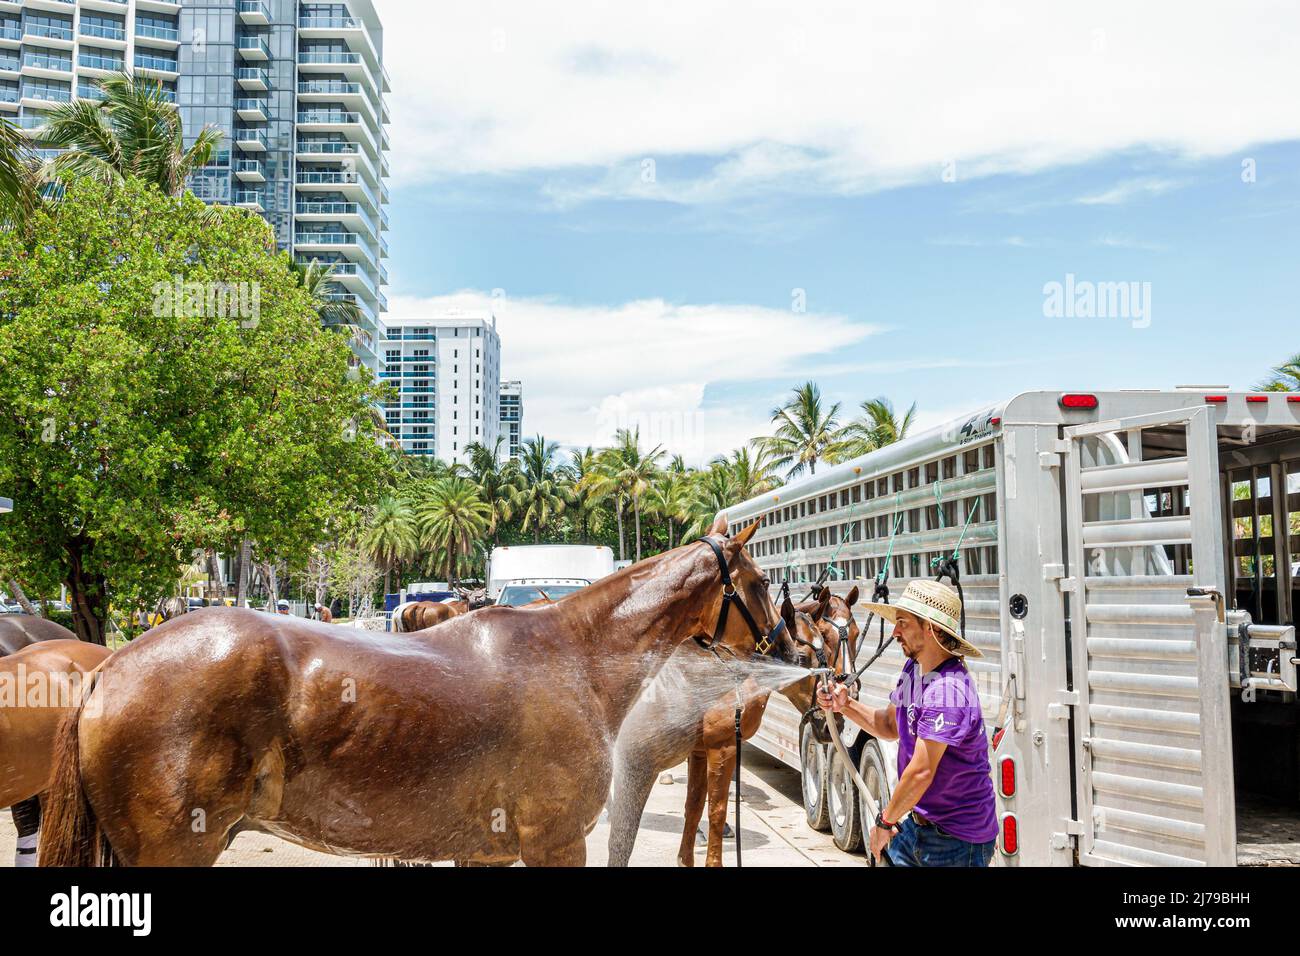 Miami Beach Florida Beach Polo World Cup Miami annual event ponies horses trailer W South Beach Hotel Collins Park hose hosing cooling down off worker Stock Photo